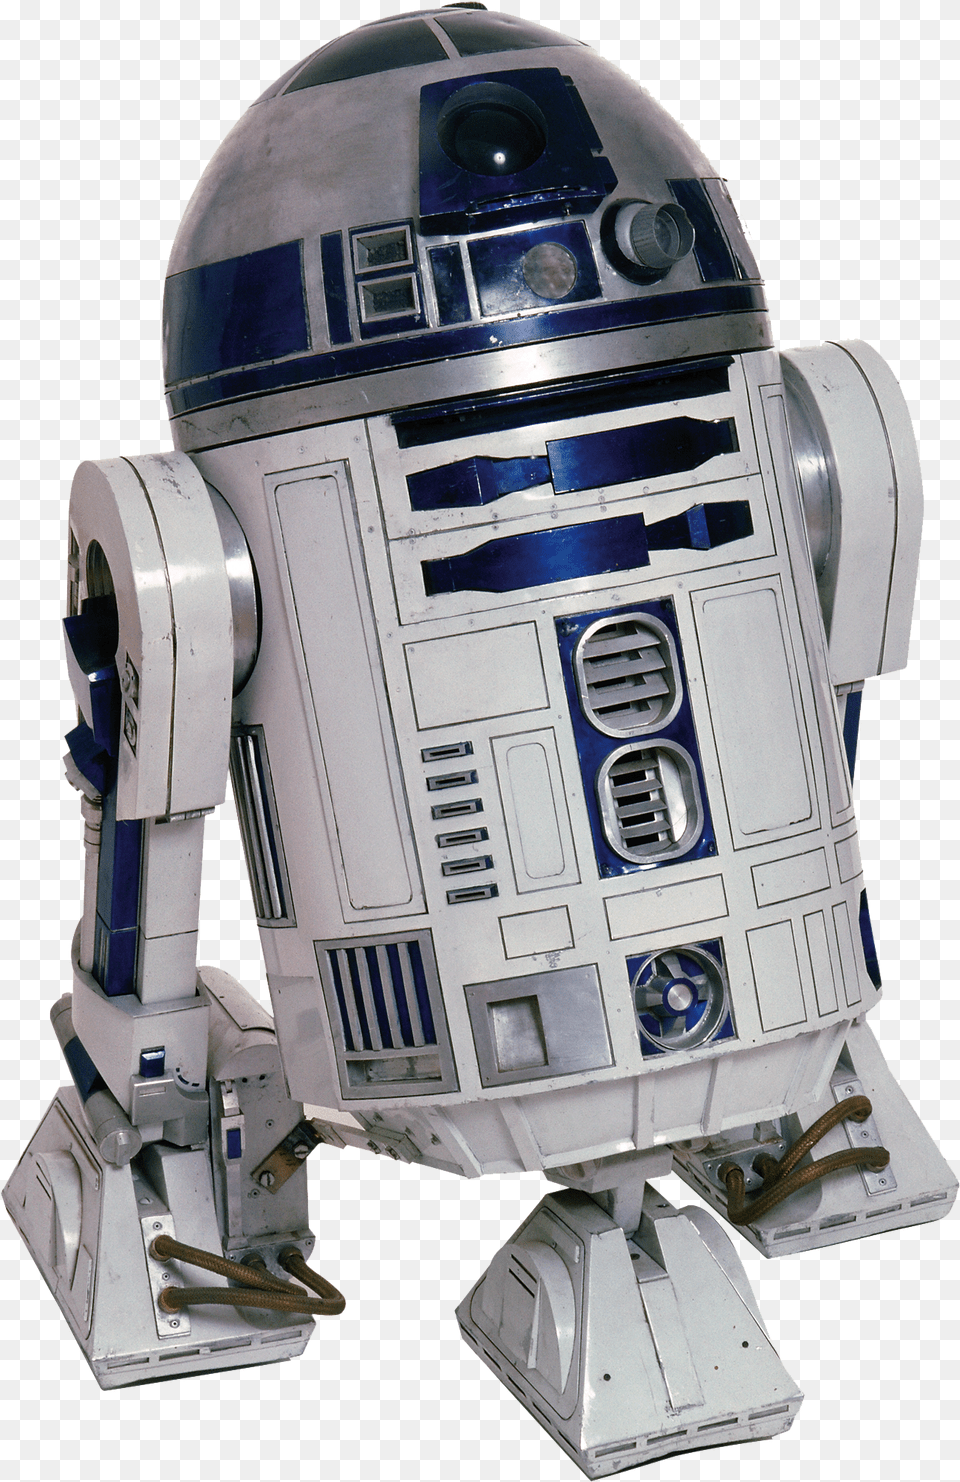 Download Star Wars Photos For Designing Projects Star Wars R2d2, Robot, Toy Free Png